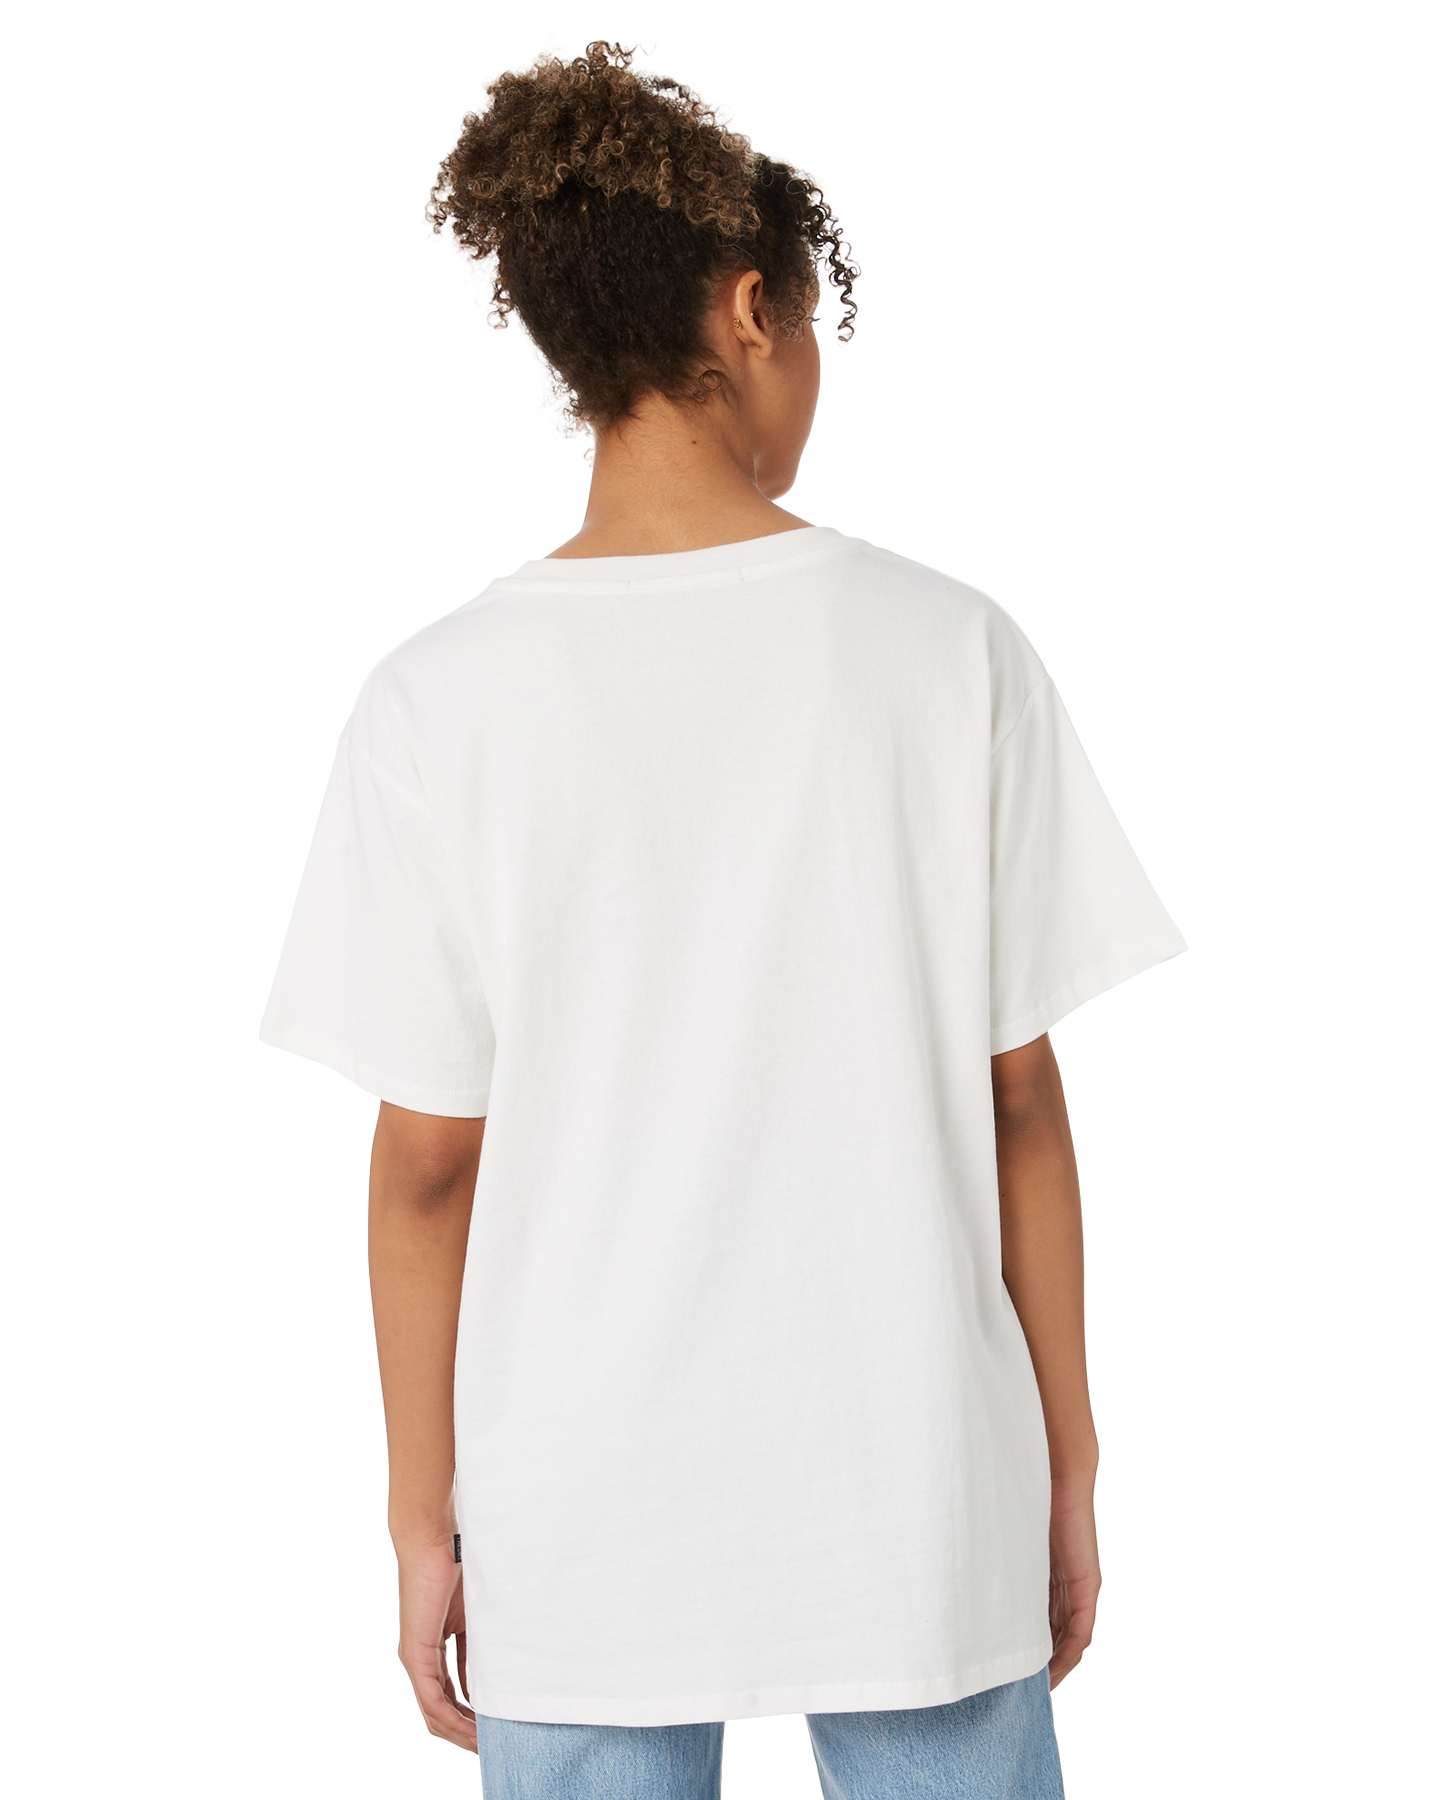 Silent Theory Grounded Tee - Vintage White | SurfStitch